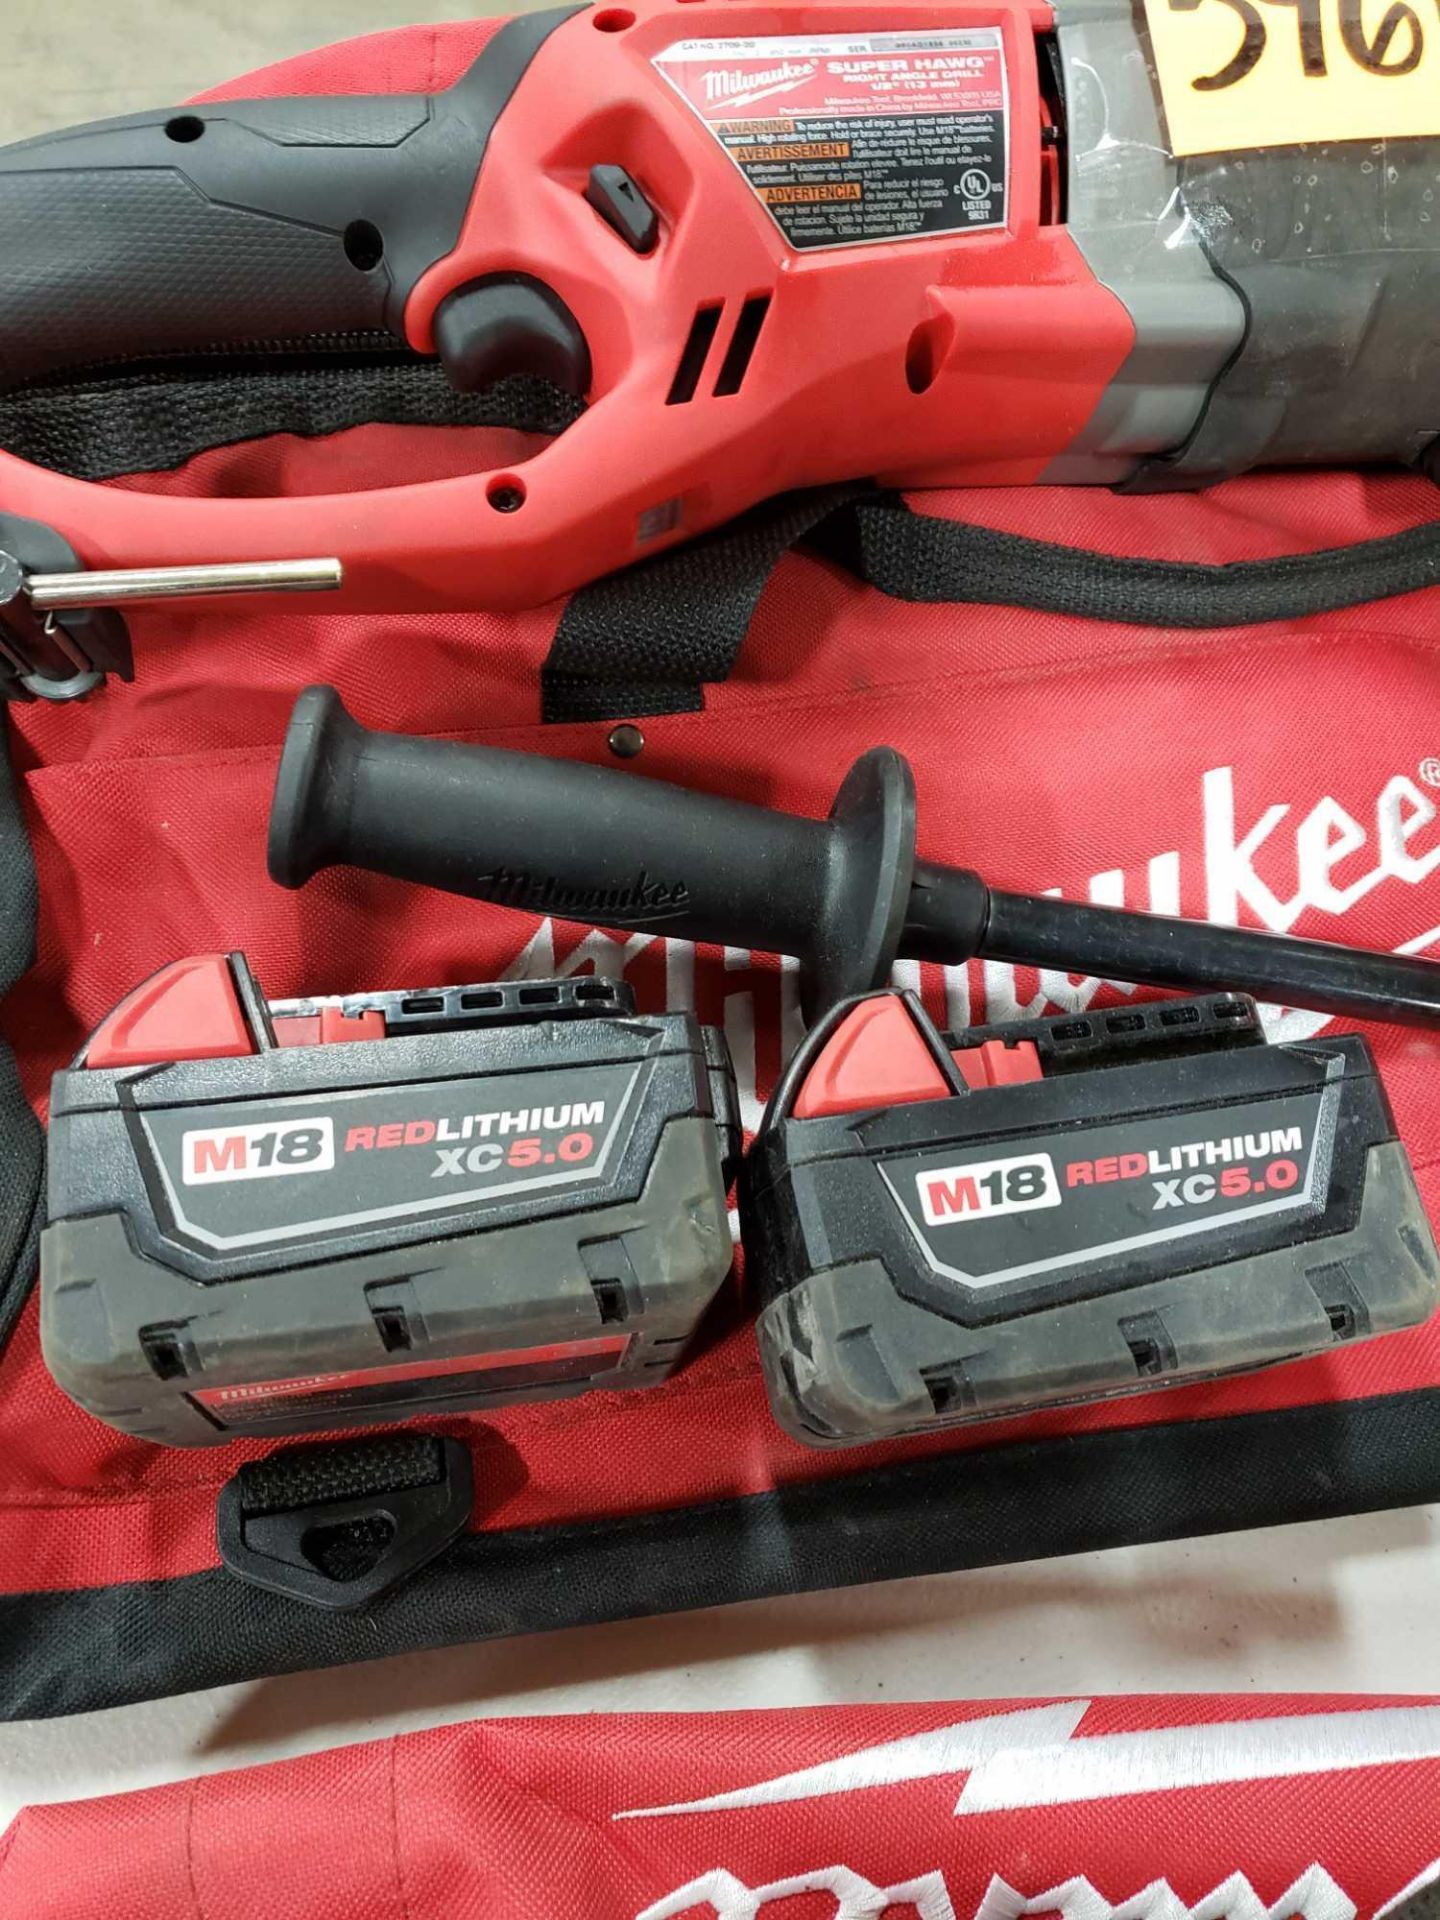 18v Milwaukee 1/2" super hawg right angle cordless drill with 2 batteries, charger, and storage bag. - Image 3 of 4